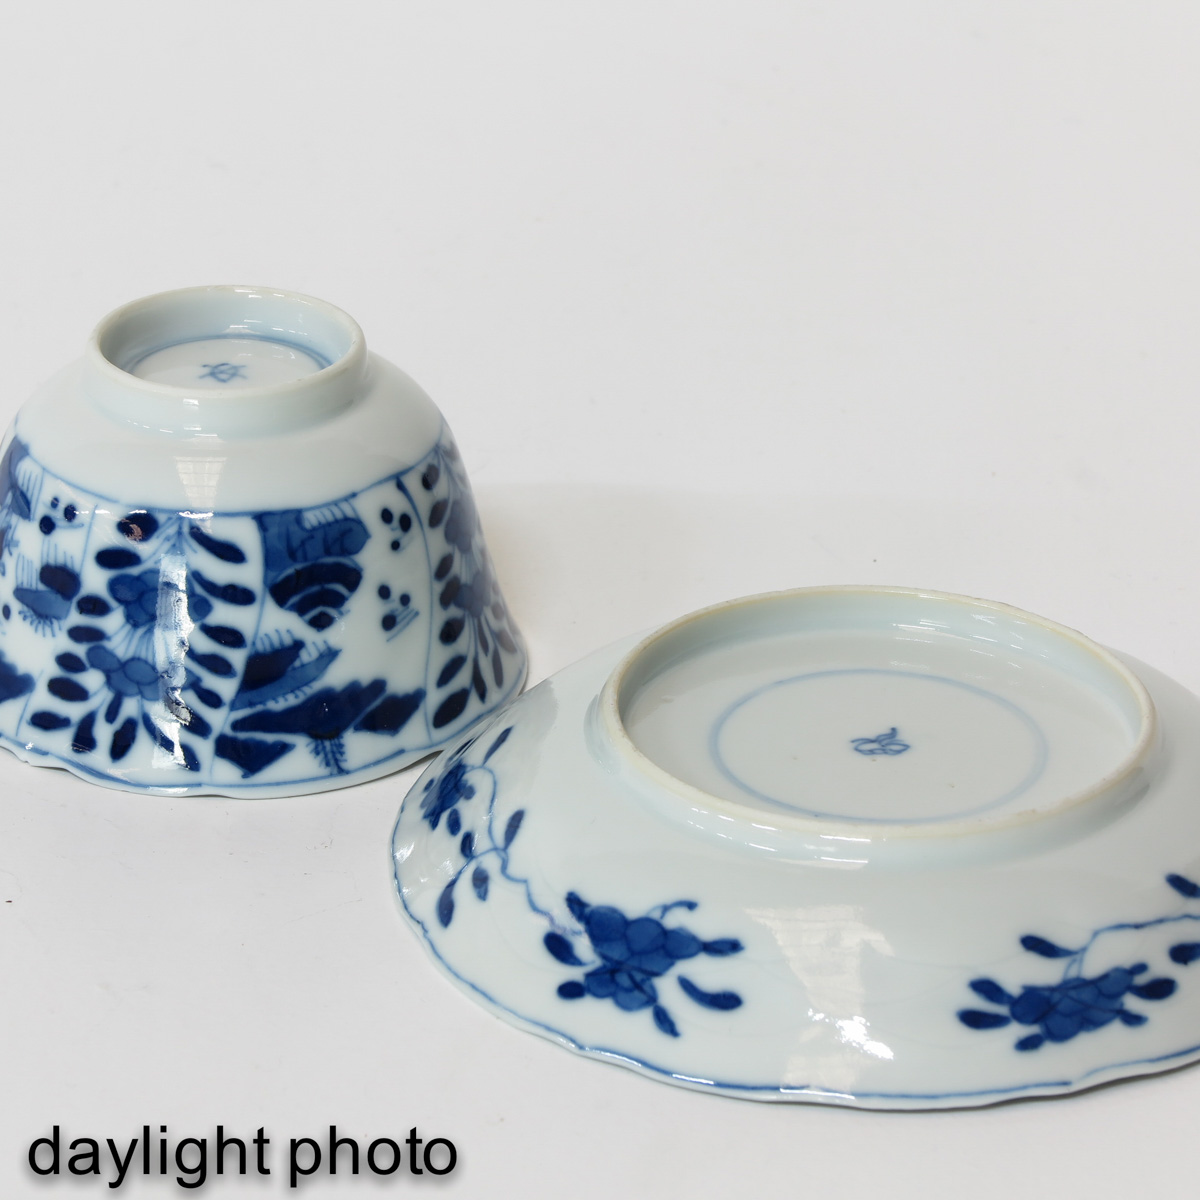 A Set of 6 Cups and Saucers - Image 10 of 10